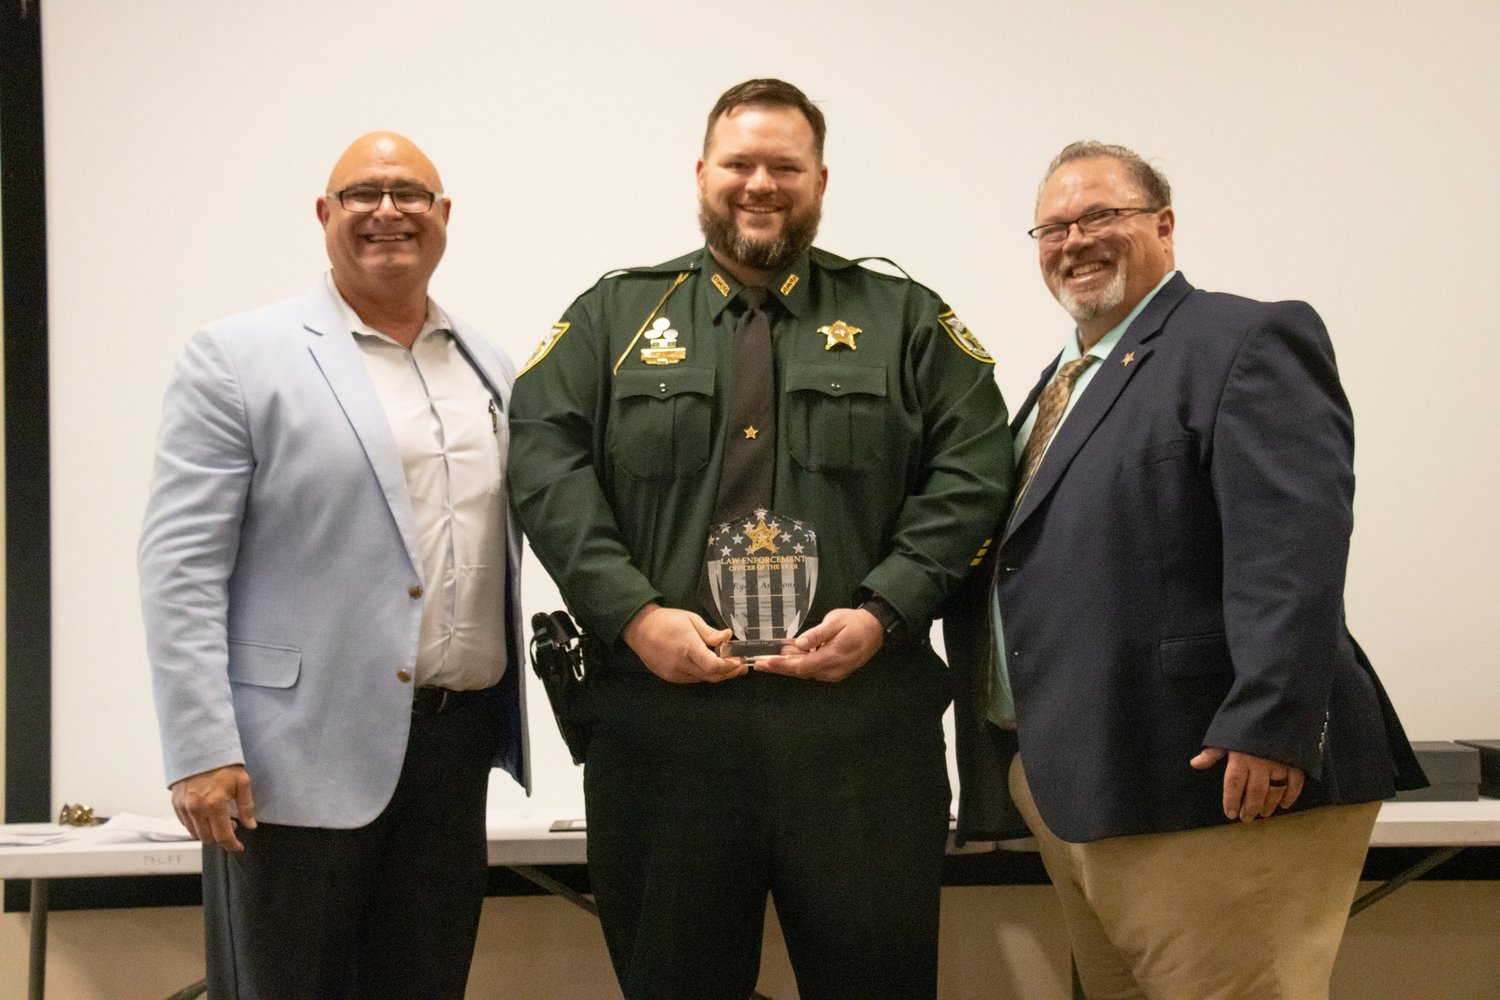 Ryane Ammons was selected Law Enforcement Officer of the Year. Pictured left to right are Major Michael Hazellief, Ryane Ammons and Sheriff Noel Stephen.